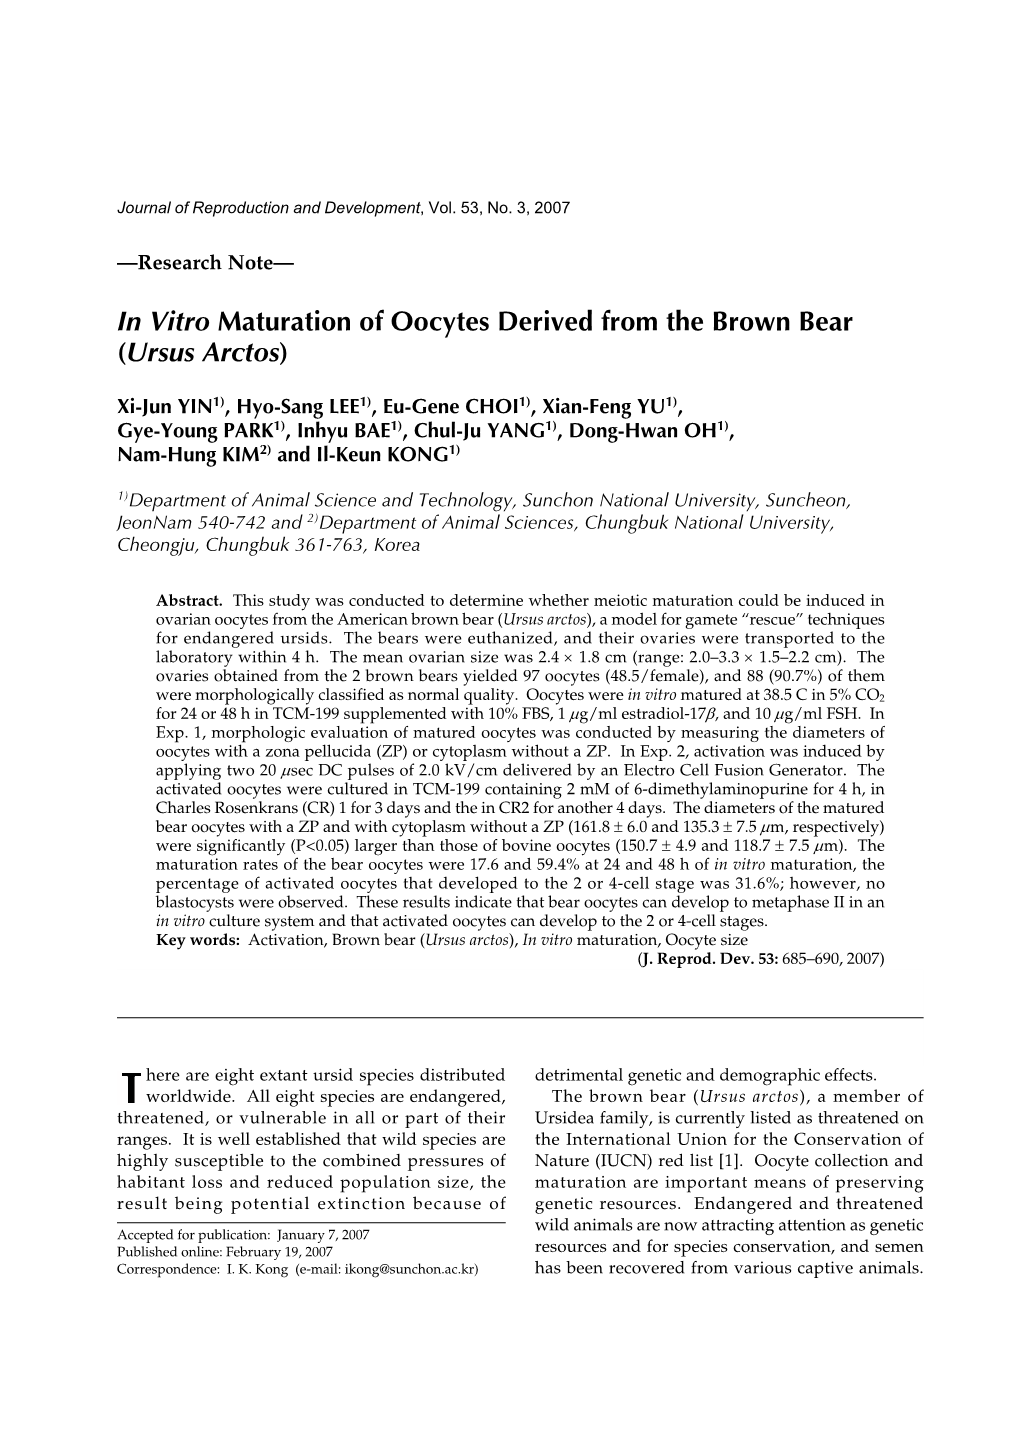 In Vitro Maturation of Oocytes Derived from the Brown Bear (Ursus Arctos)